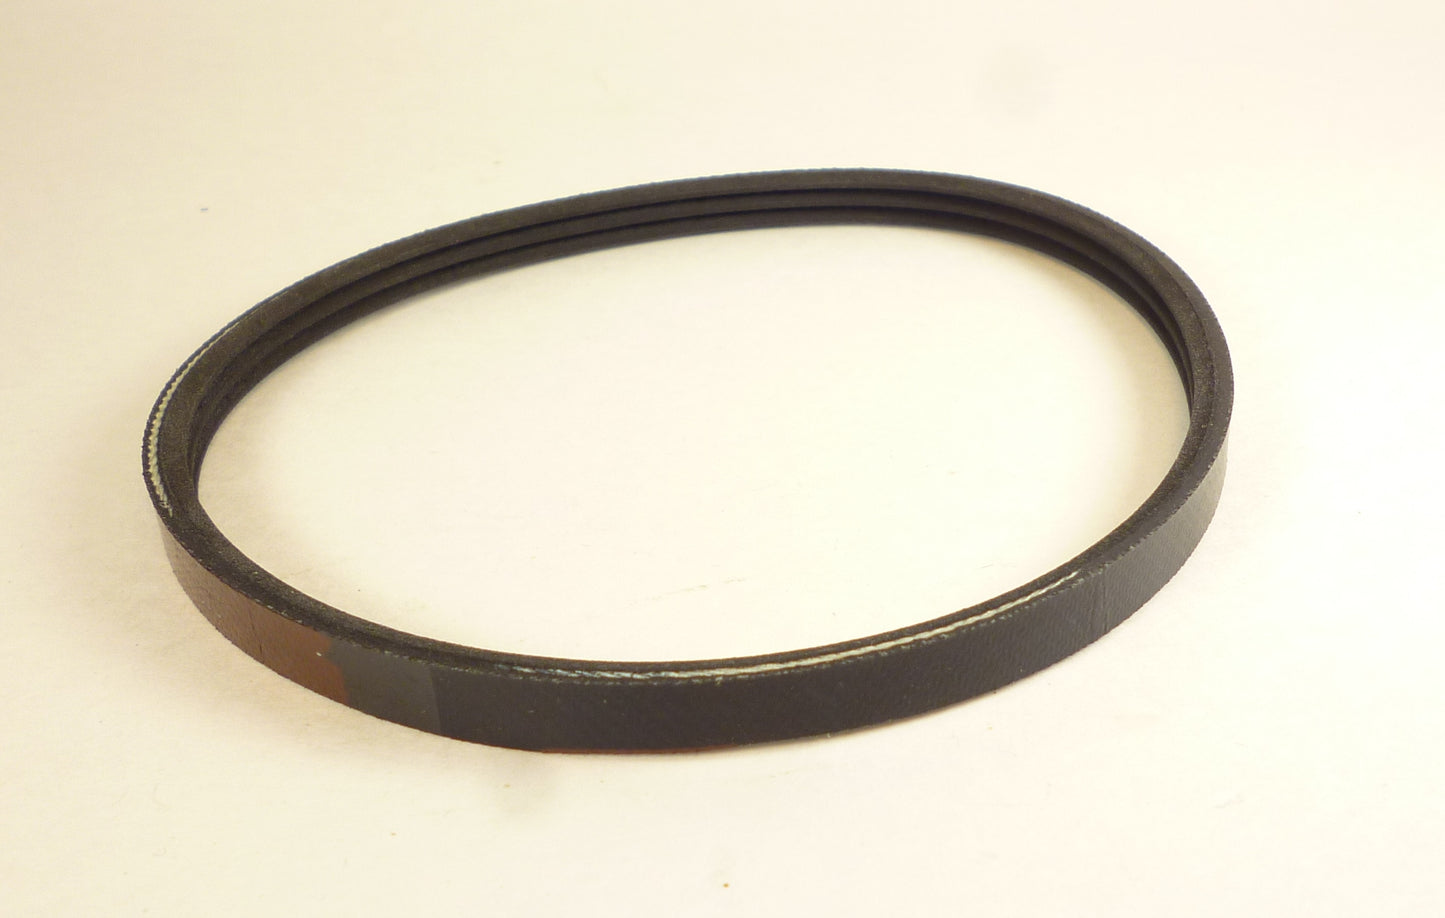 Replacement Motor Drive BELT for Scheppach M90106 10" Band Saw